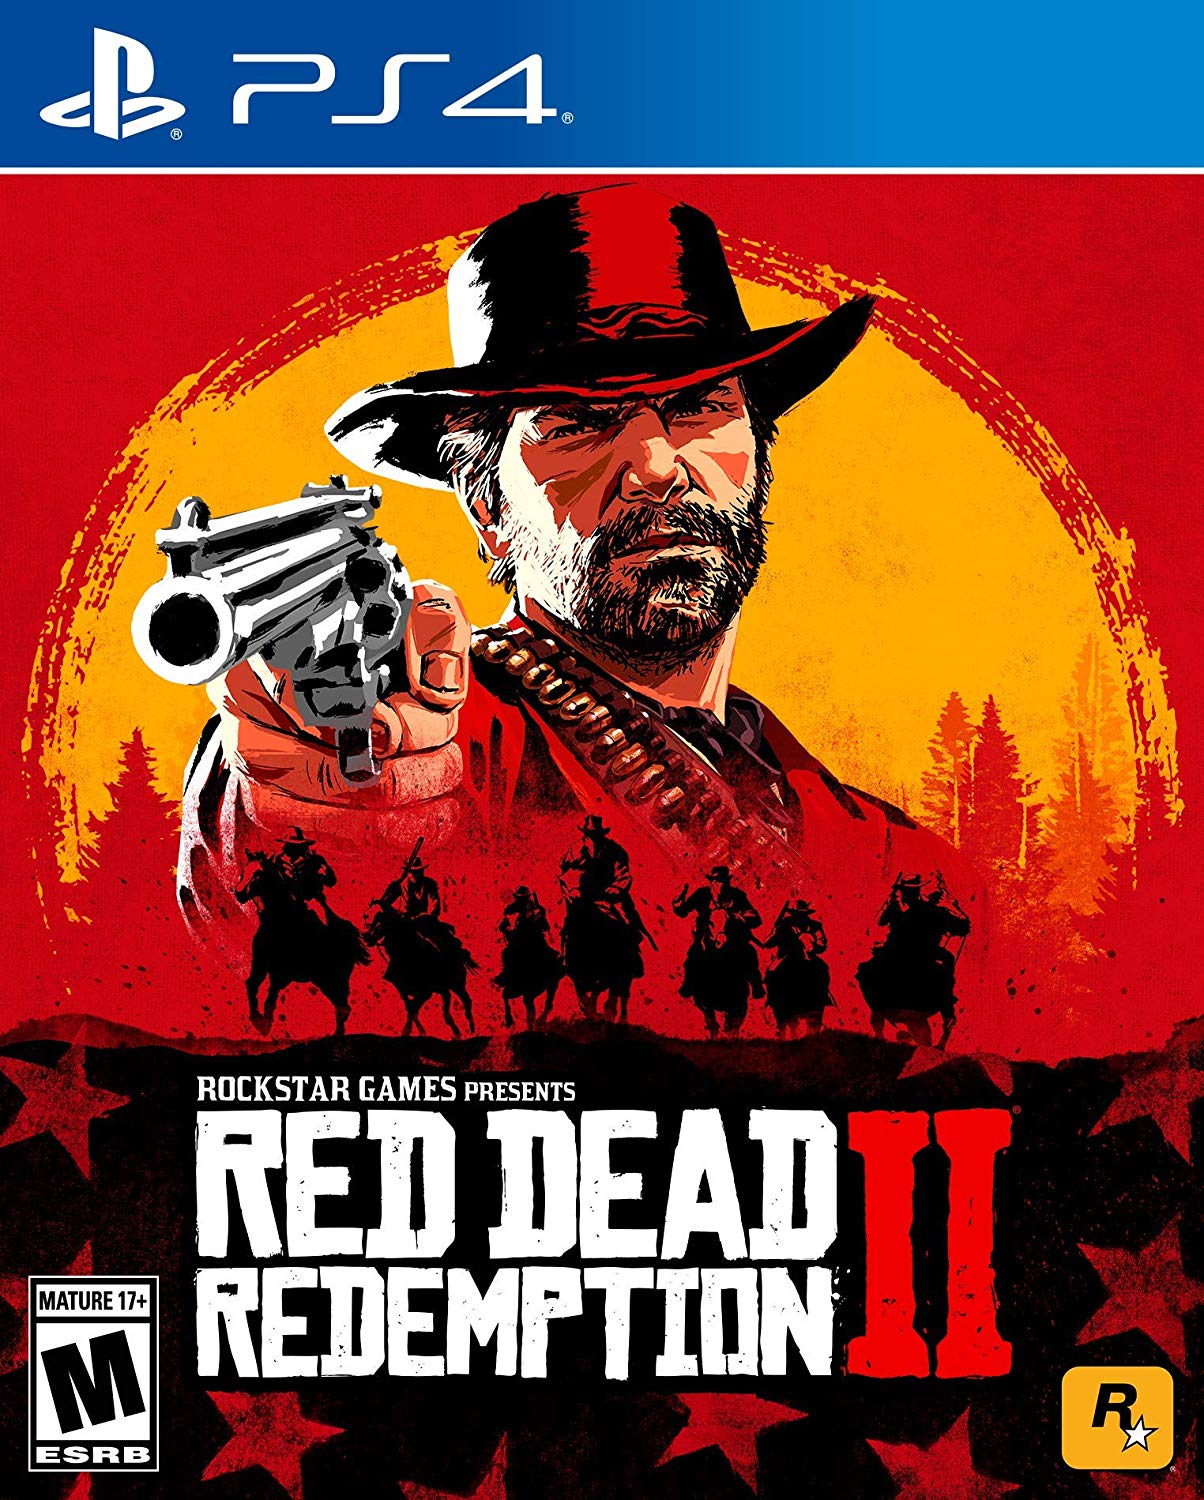 PS4 RED DEAD REDEMPTION 2 / PS4-PS4 RED DEAD REDEMPTION 2 / PS4